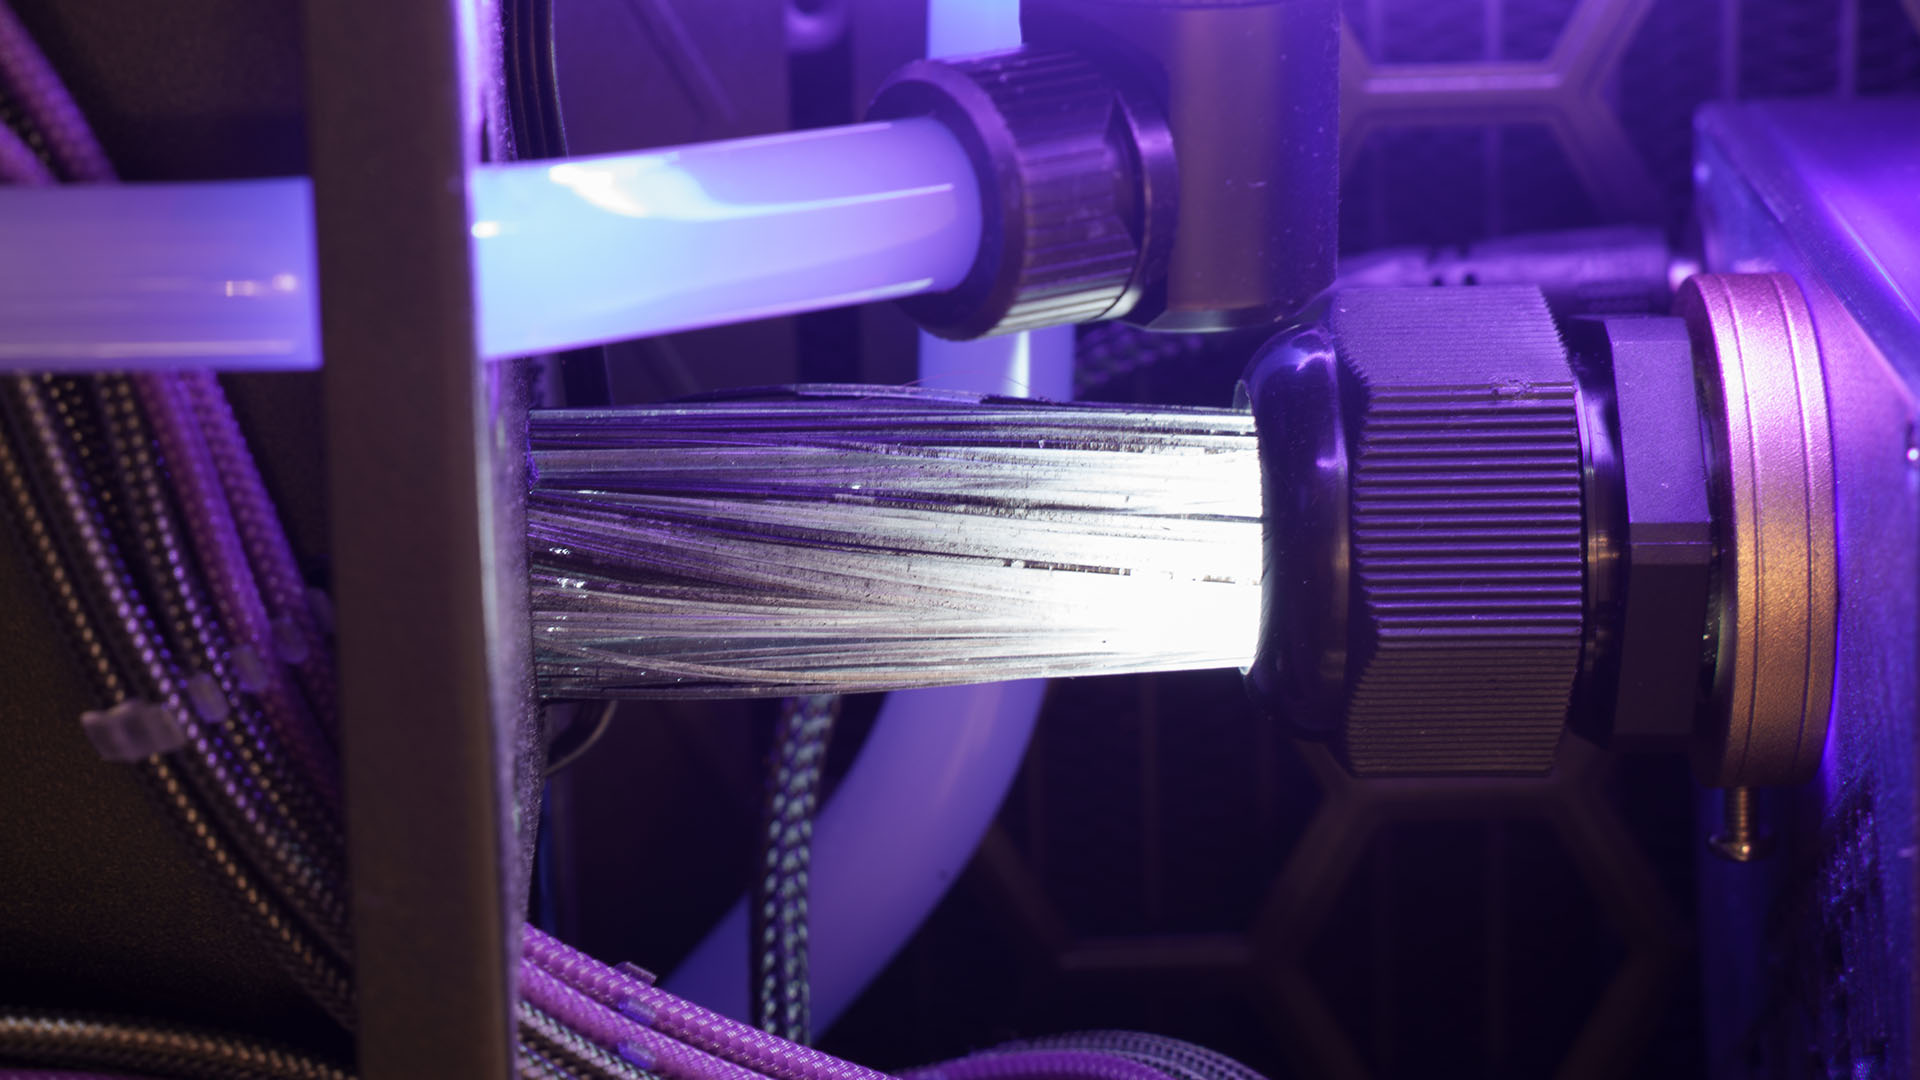 A close up of the case, focussing on the custom water cooling loop